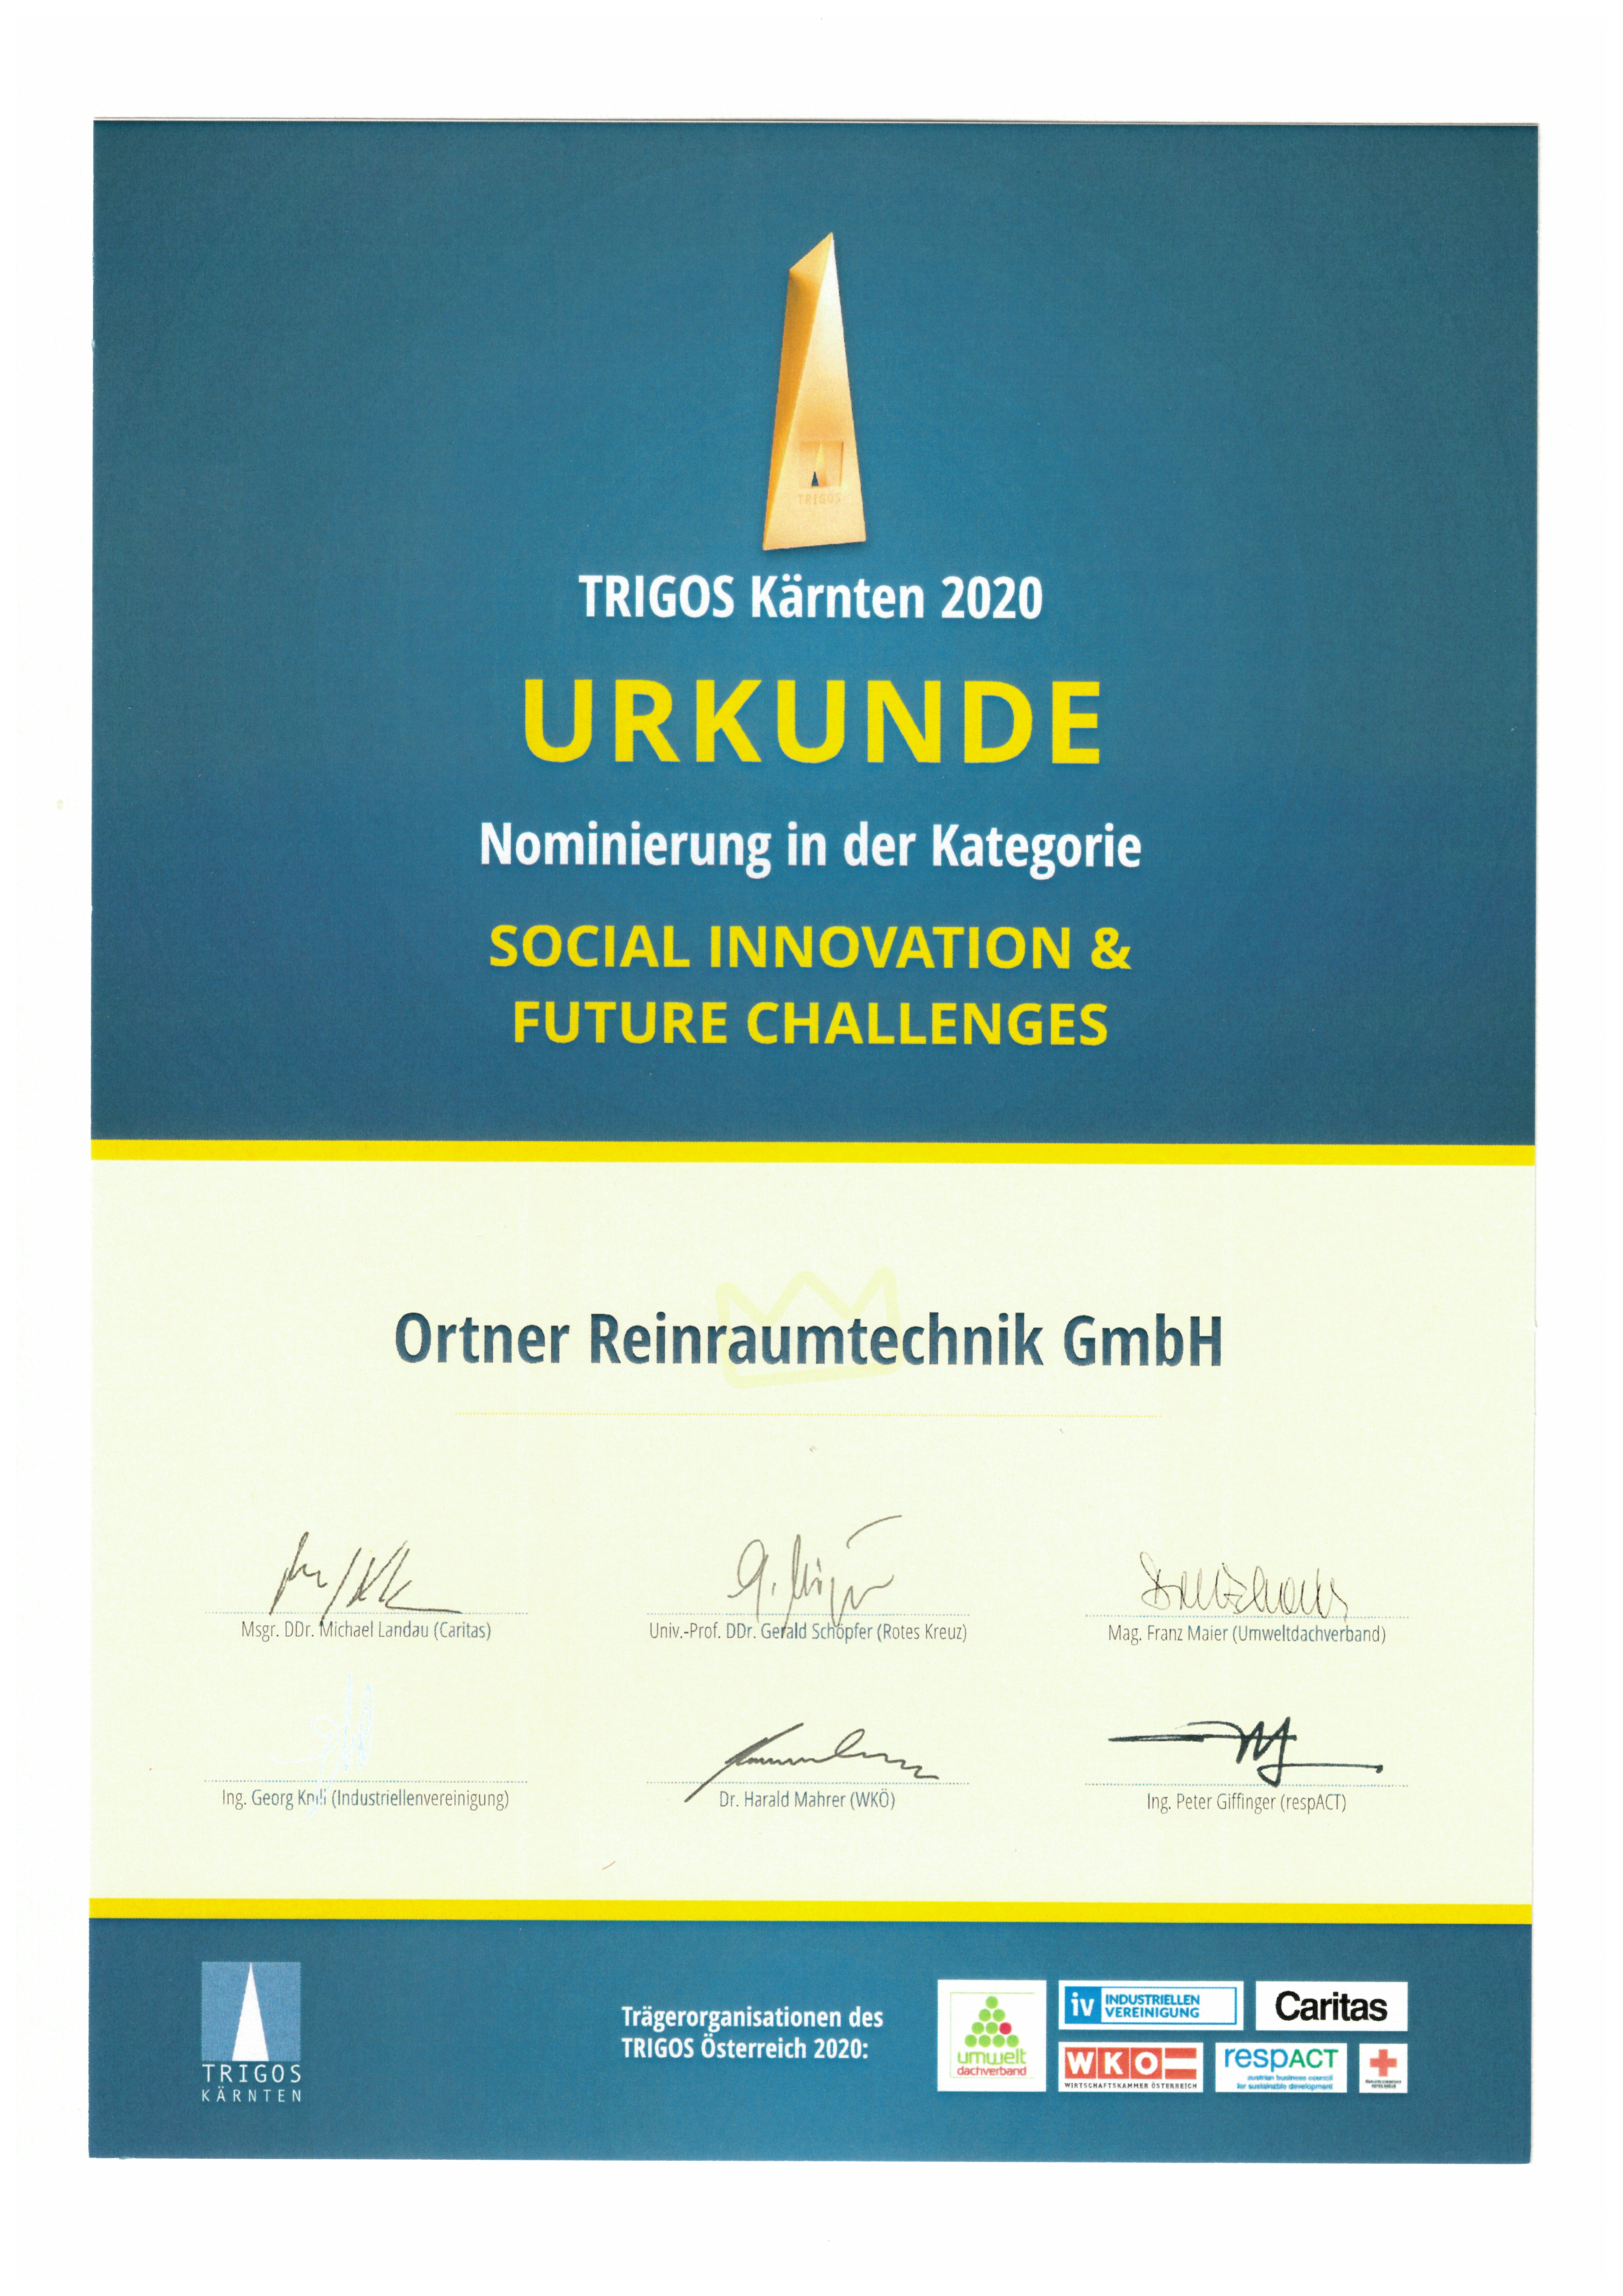 Certificate from TRIGOS Carinthia 2020 for Social Innovation & Future Challenges